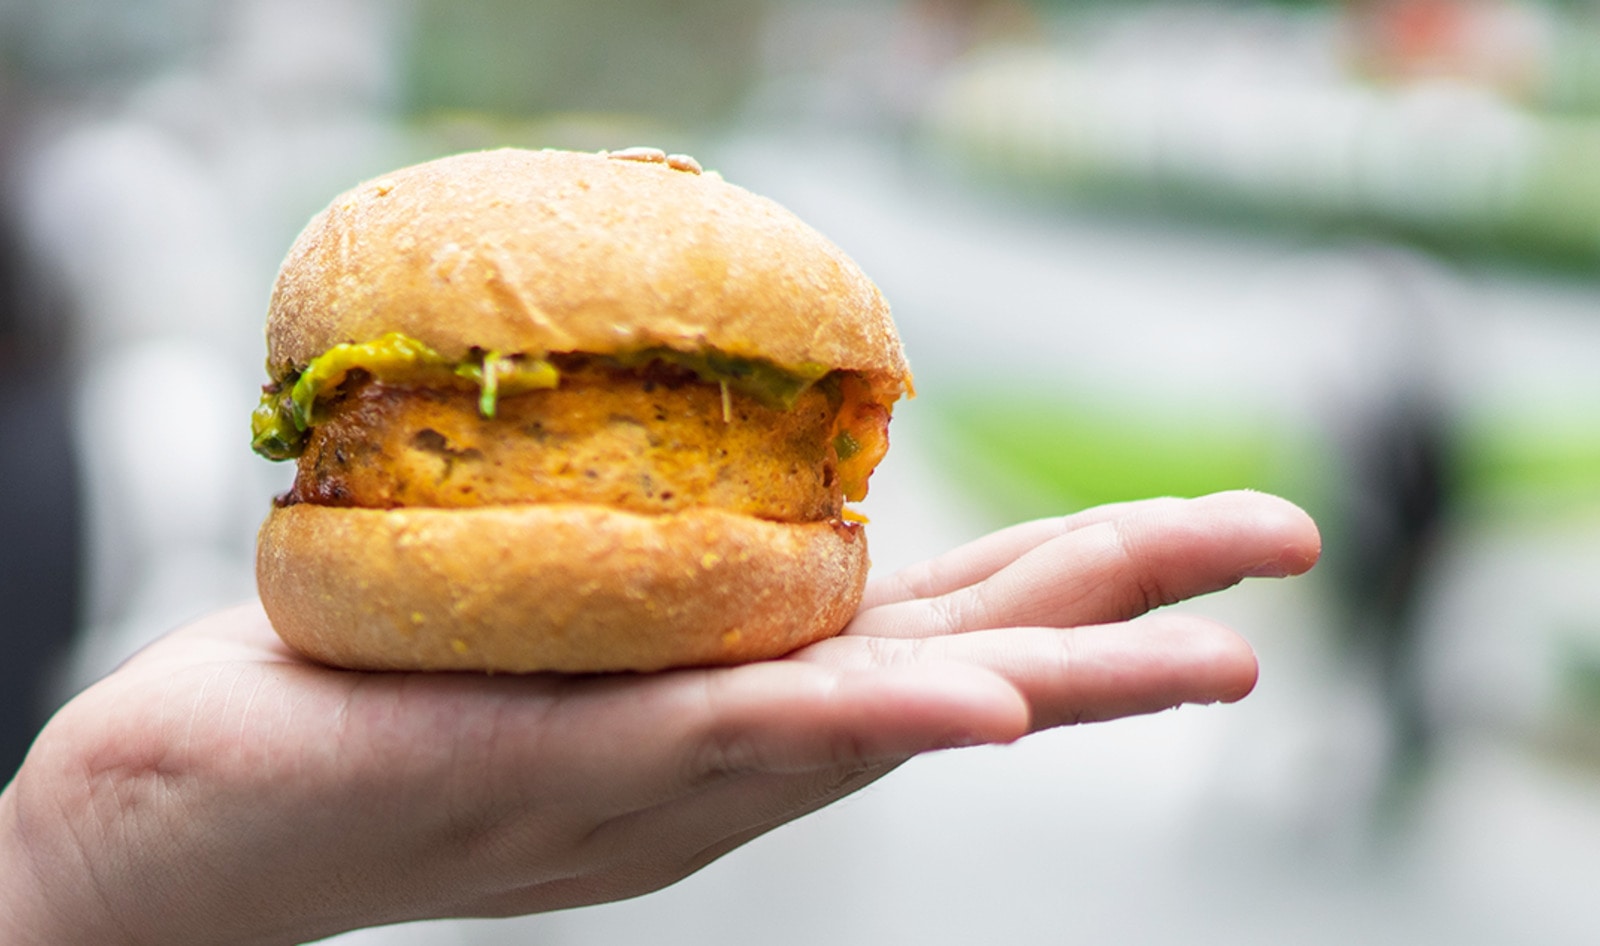 225 Vegan JUST Egg Sandwiches Sold in 25 Minutes in Singapore